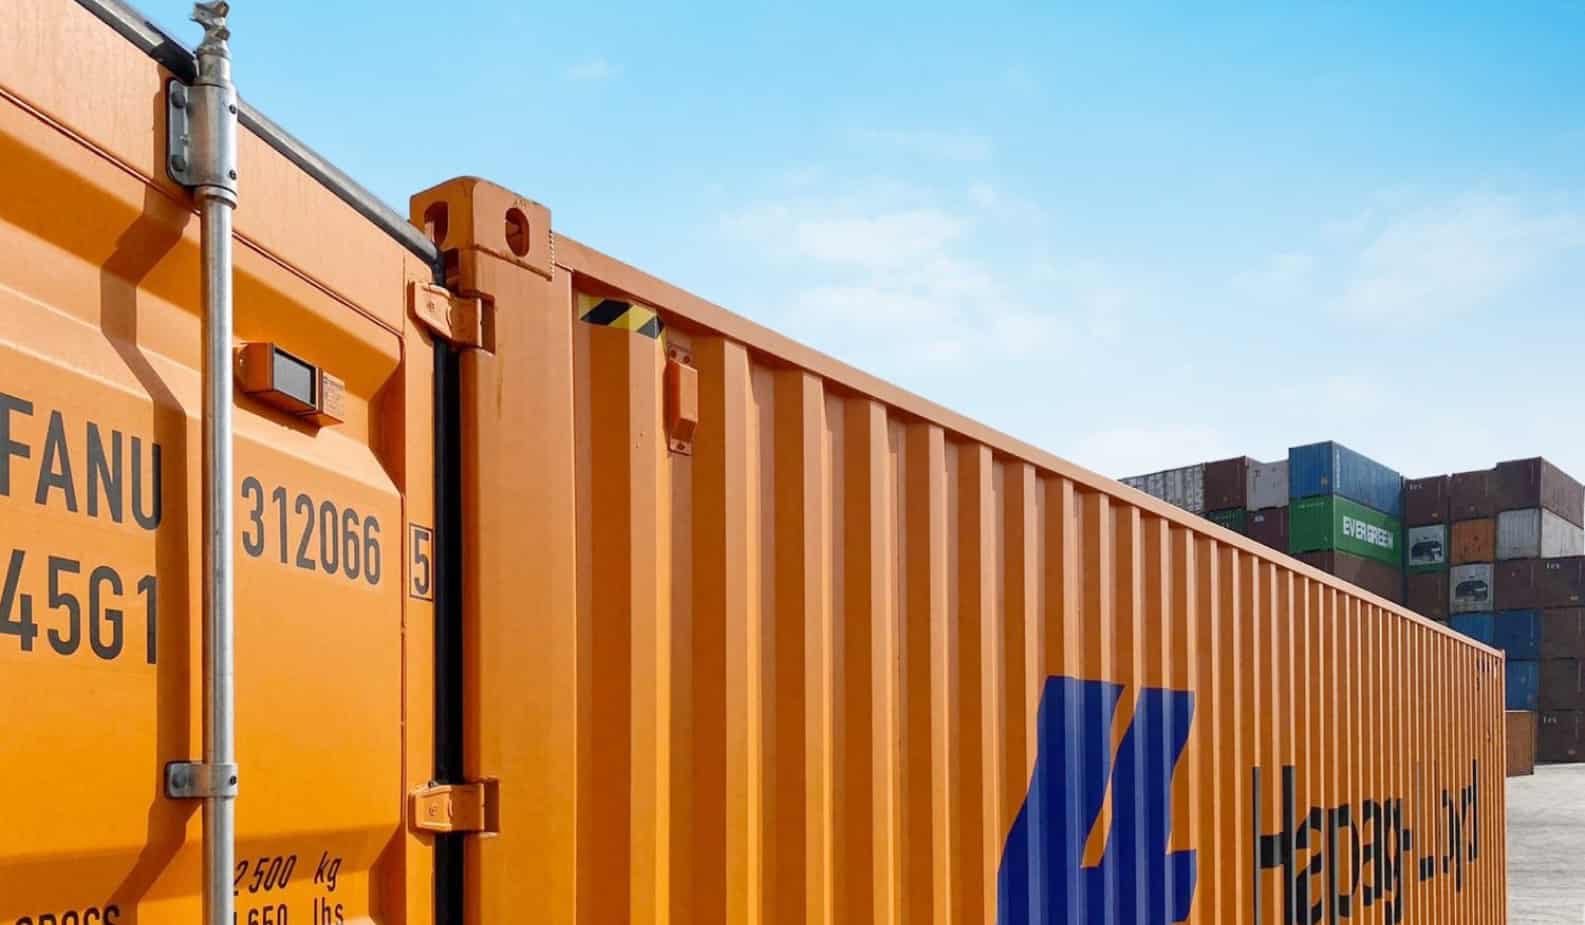 Hapag-Lloyd installs tracking devices on 700,000 containers